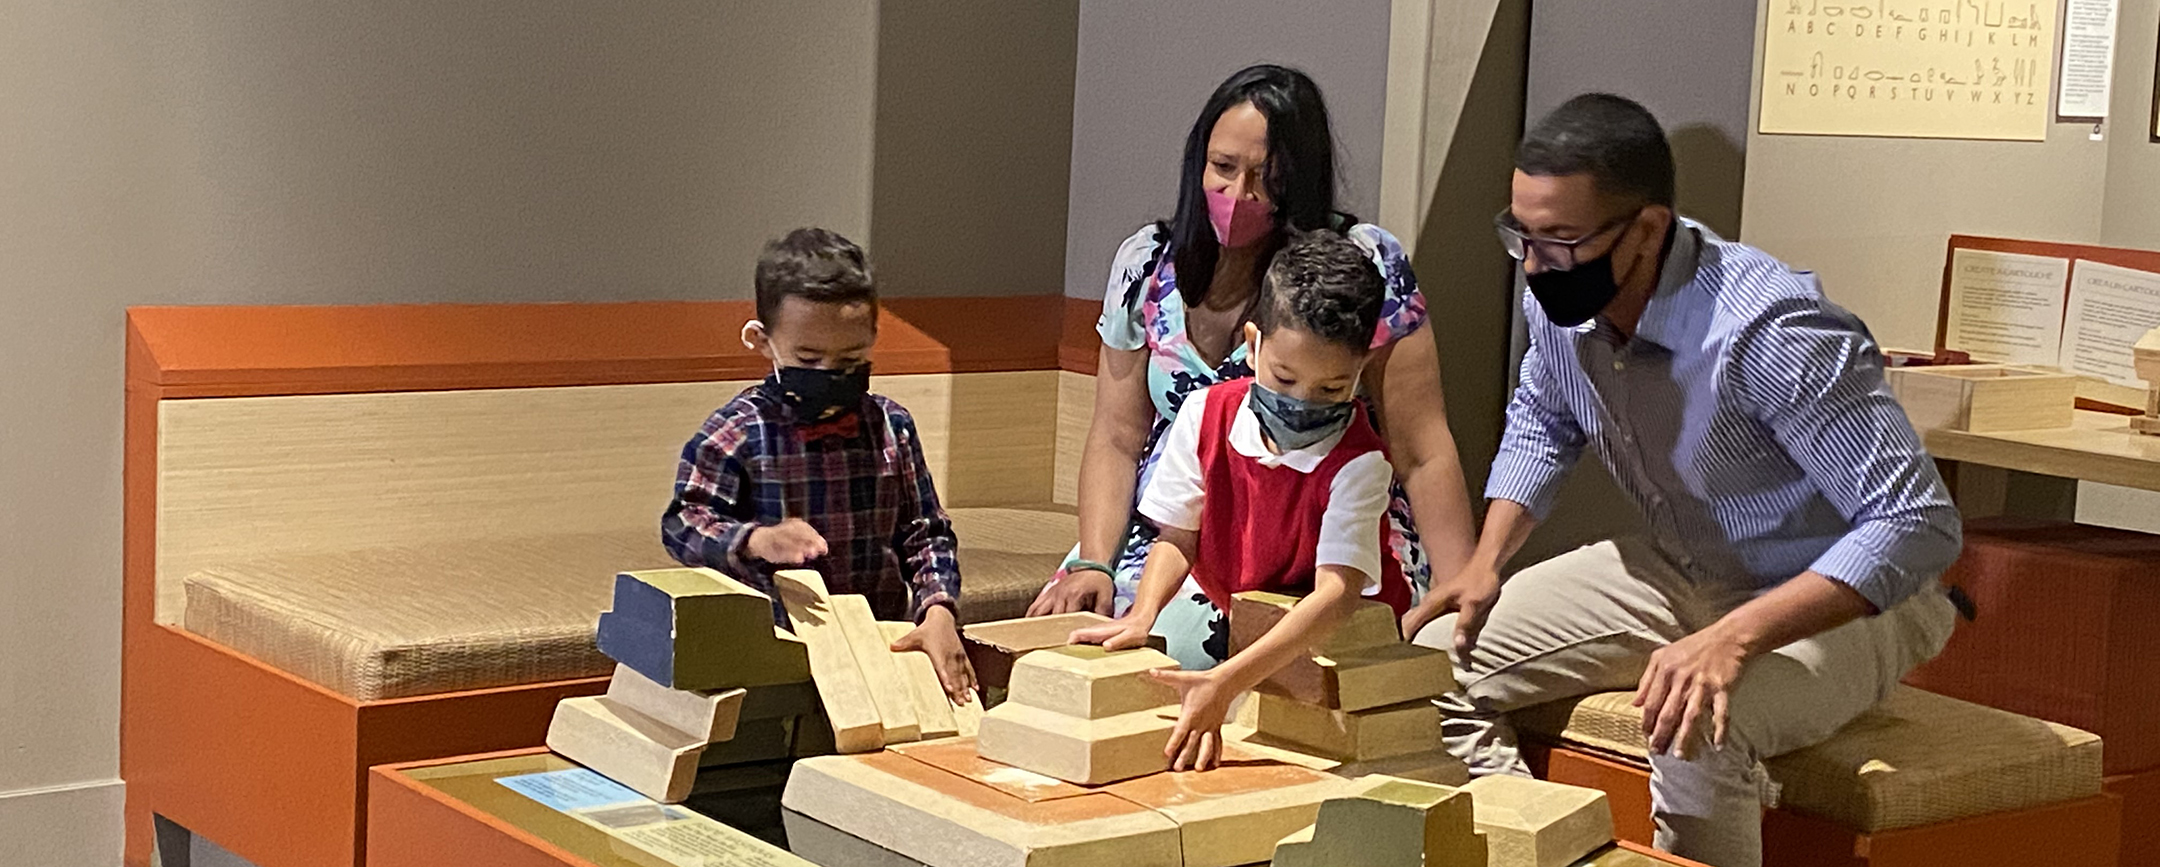 Family Builds Puzzle Pyramid in Discover Ancient Egypt Exhibition